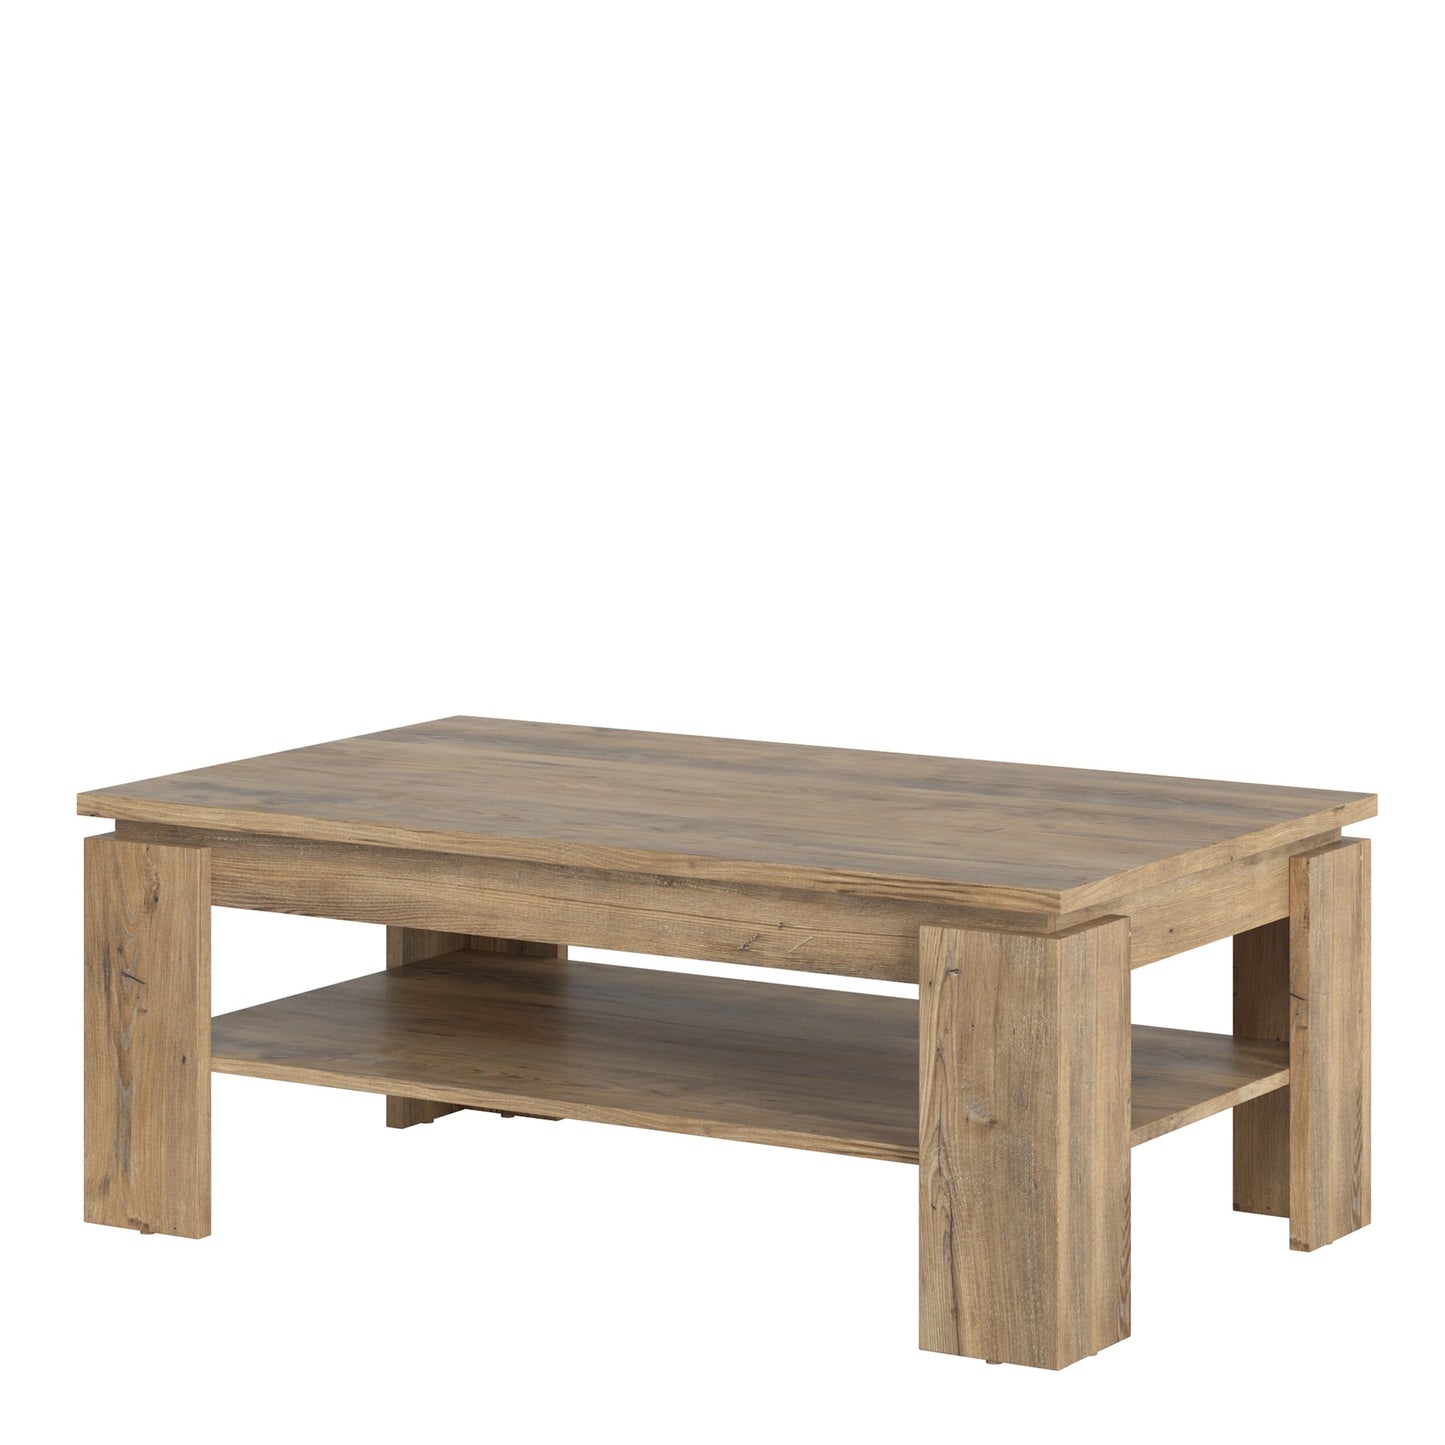 Furniture To Go Rapallo Large Coffee Table in Chestnut & Matera Grey